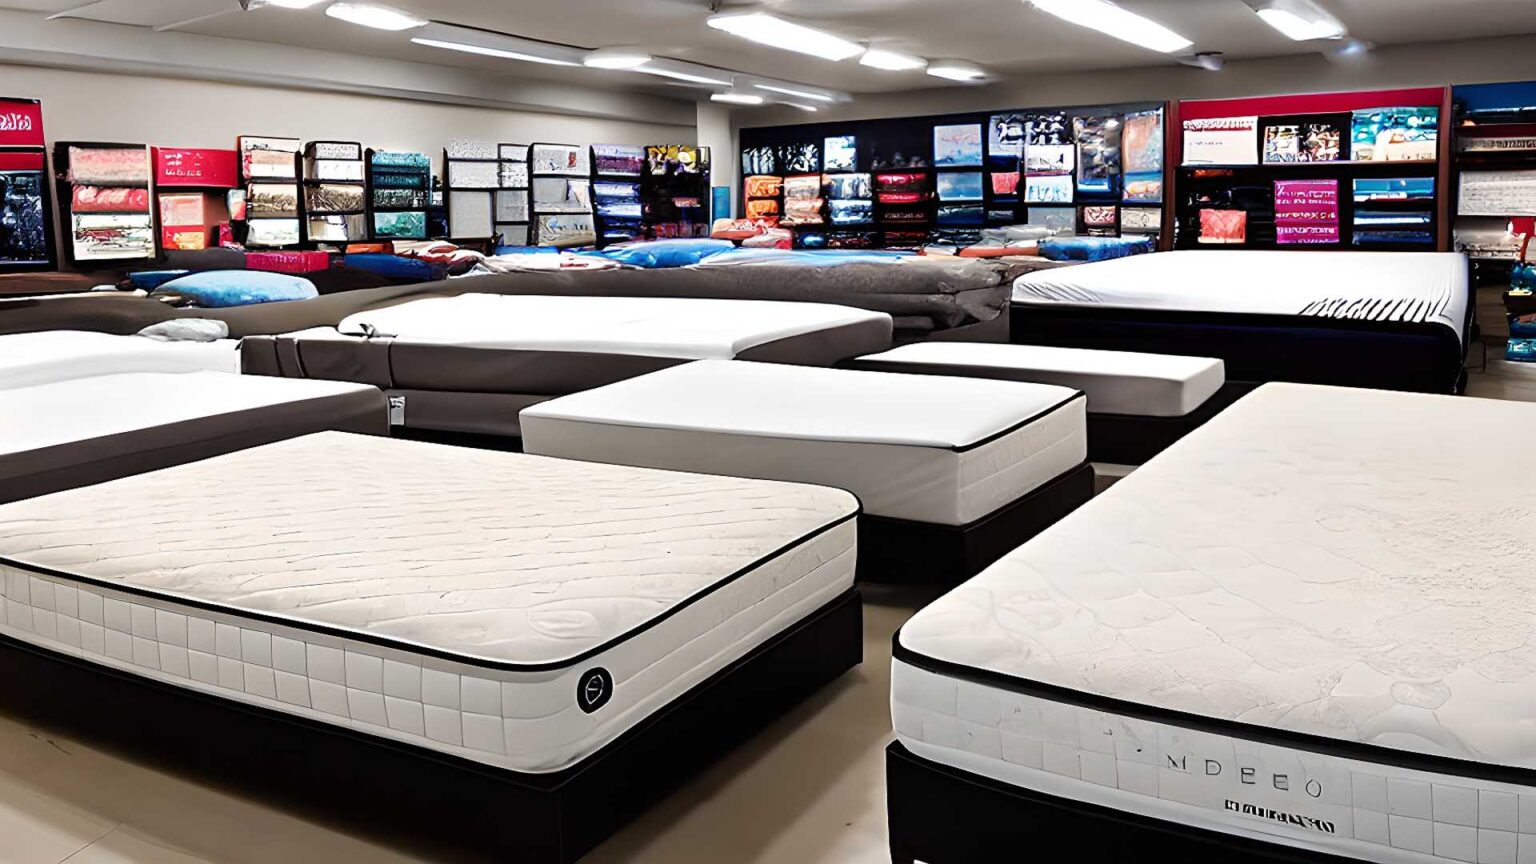 Mattress Stores, mattress dealers, and mattress retailers near me in Rio Rancho, NM